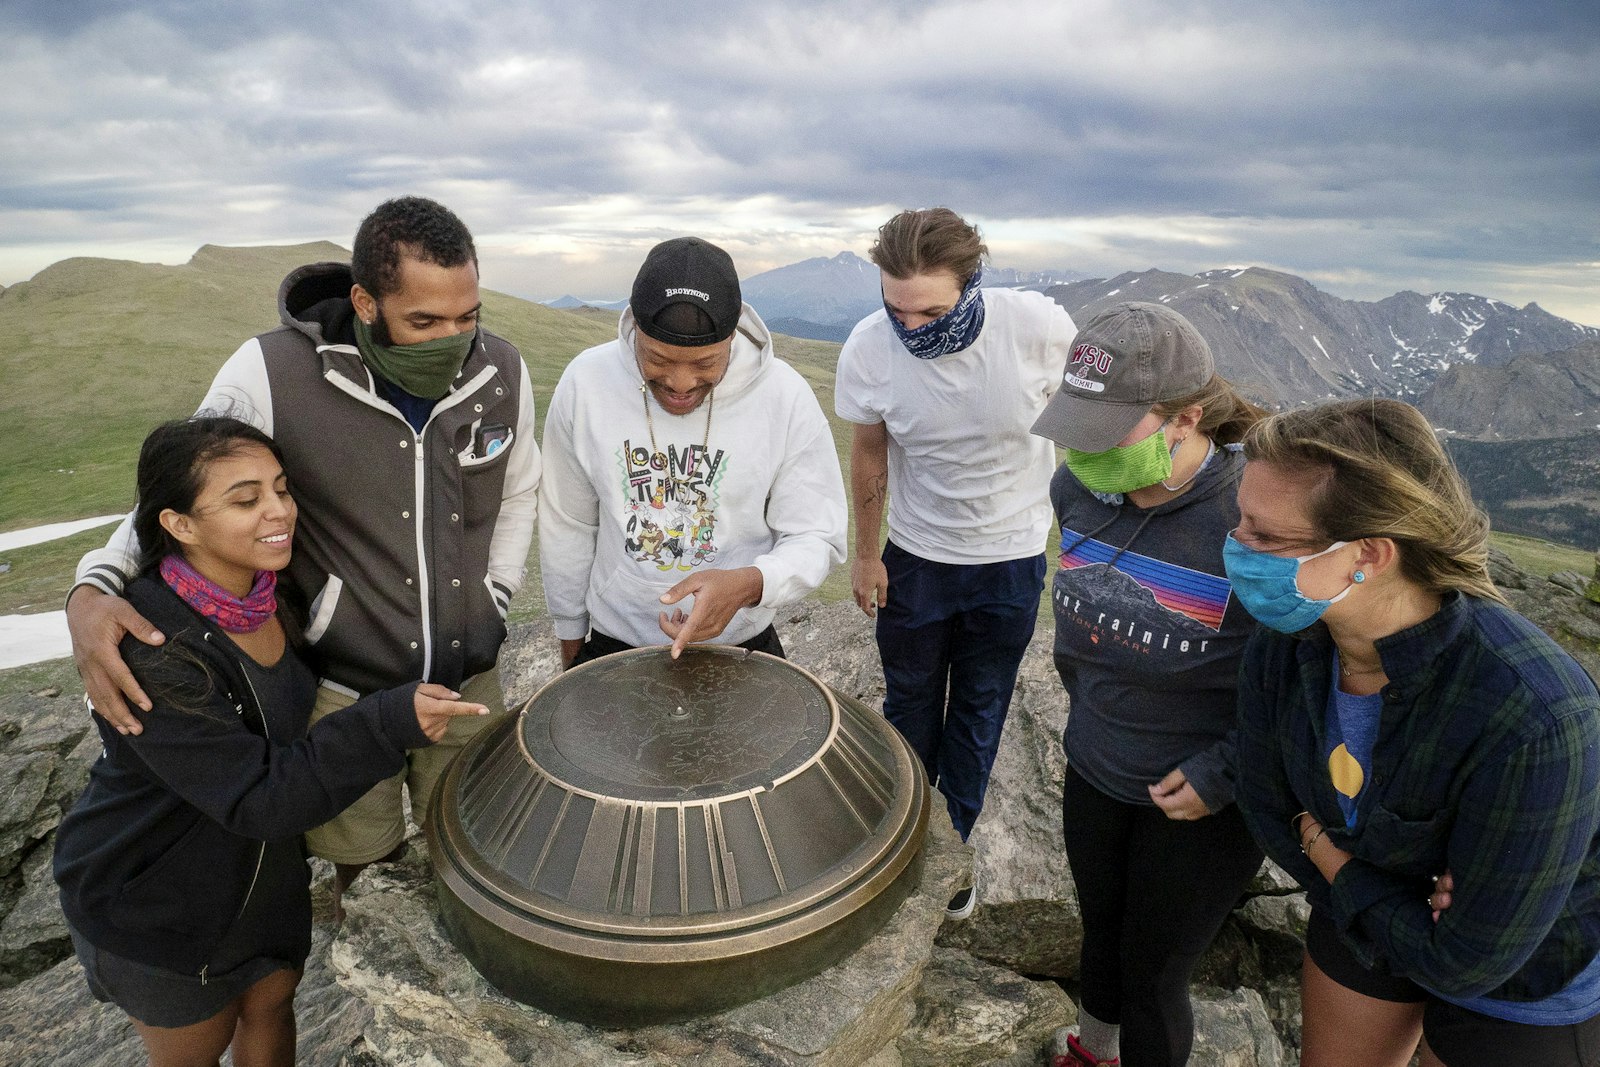 A group of people lean towards an index at the summit of a mountain